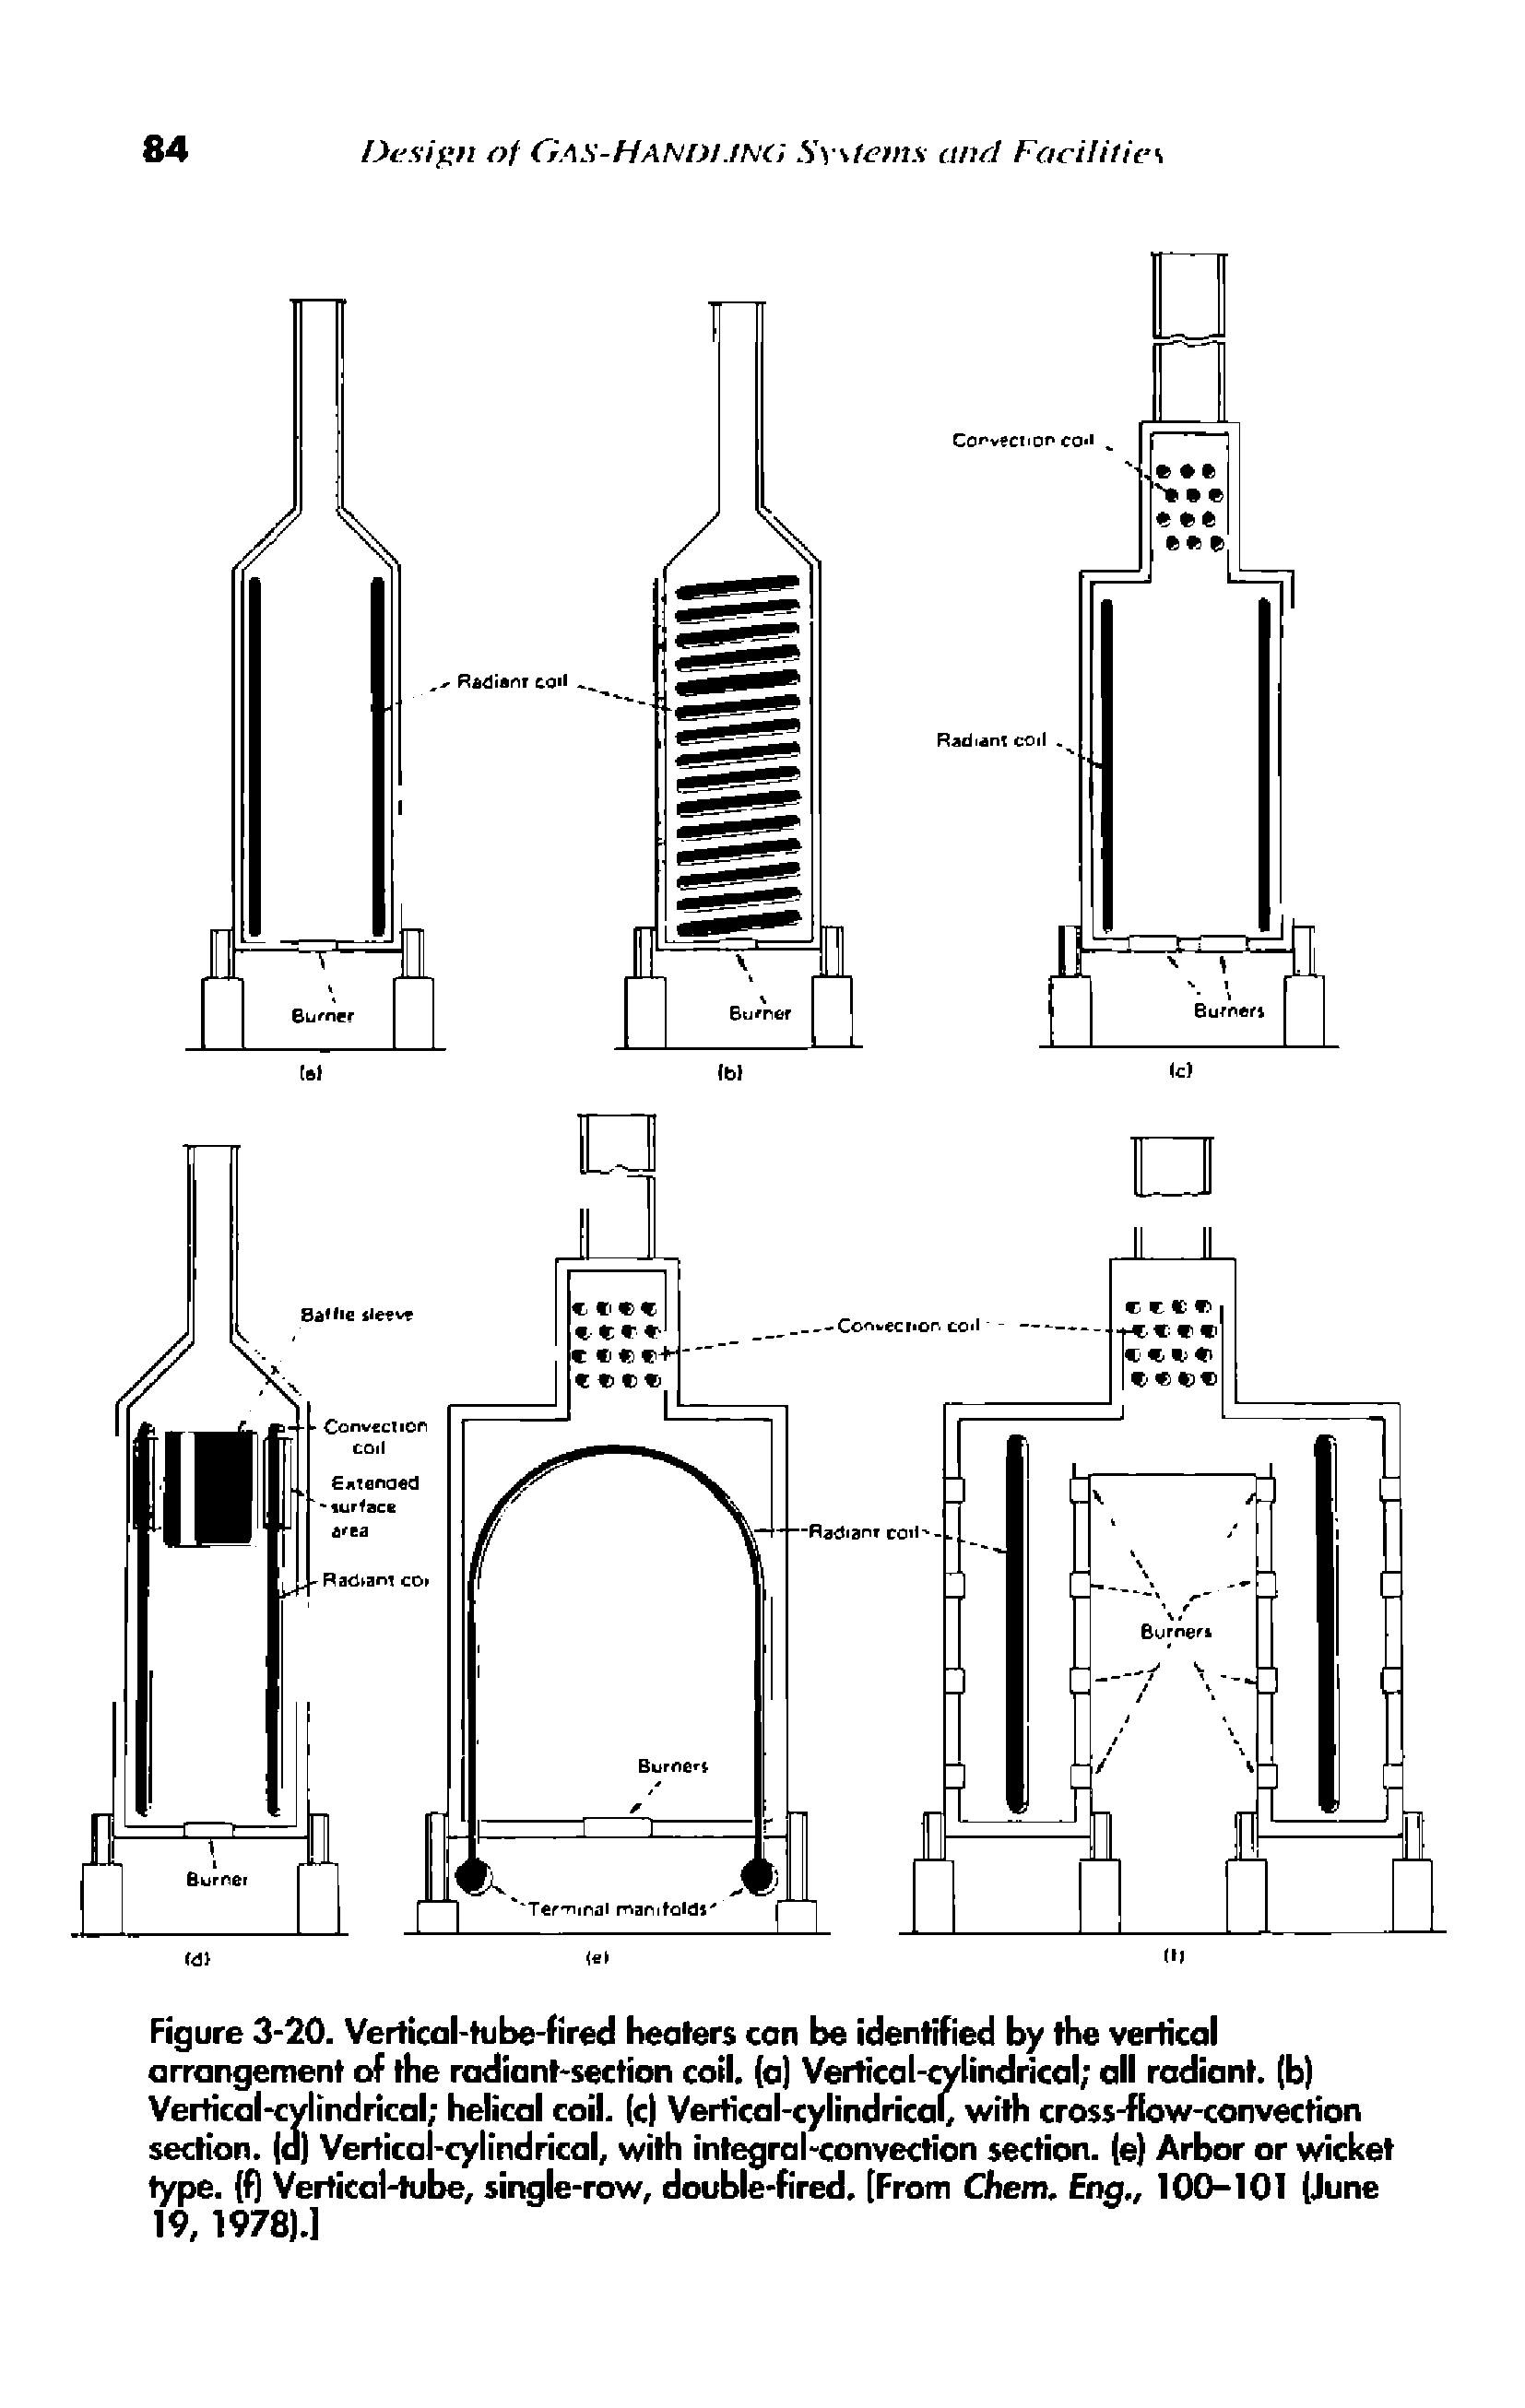 Figure 3-20. Vertical-tube-fired heaters con be identified by the vertical arrangement of the radiant-section coil, (a) Vertical- lindrical all radiant, (b) Vertical-cylindrical helical coil, (c) Vertical-cylindrical, with cross-flow-convection section. d) Vertical-cylindrical, with integral-convection section, (e) Arbor or wicket type, (f) Vertical-tube, single-row, double-fired. [From Chem. Eng, 100-101 (June 19, 1978).]...